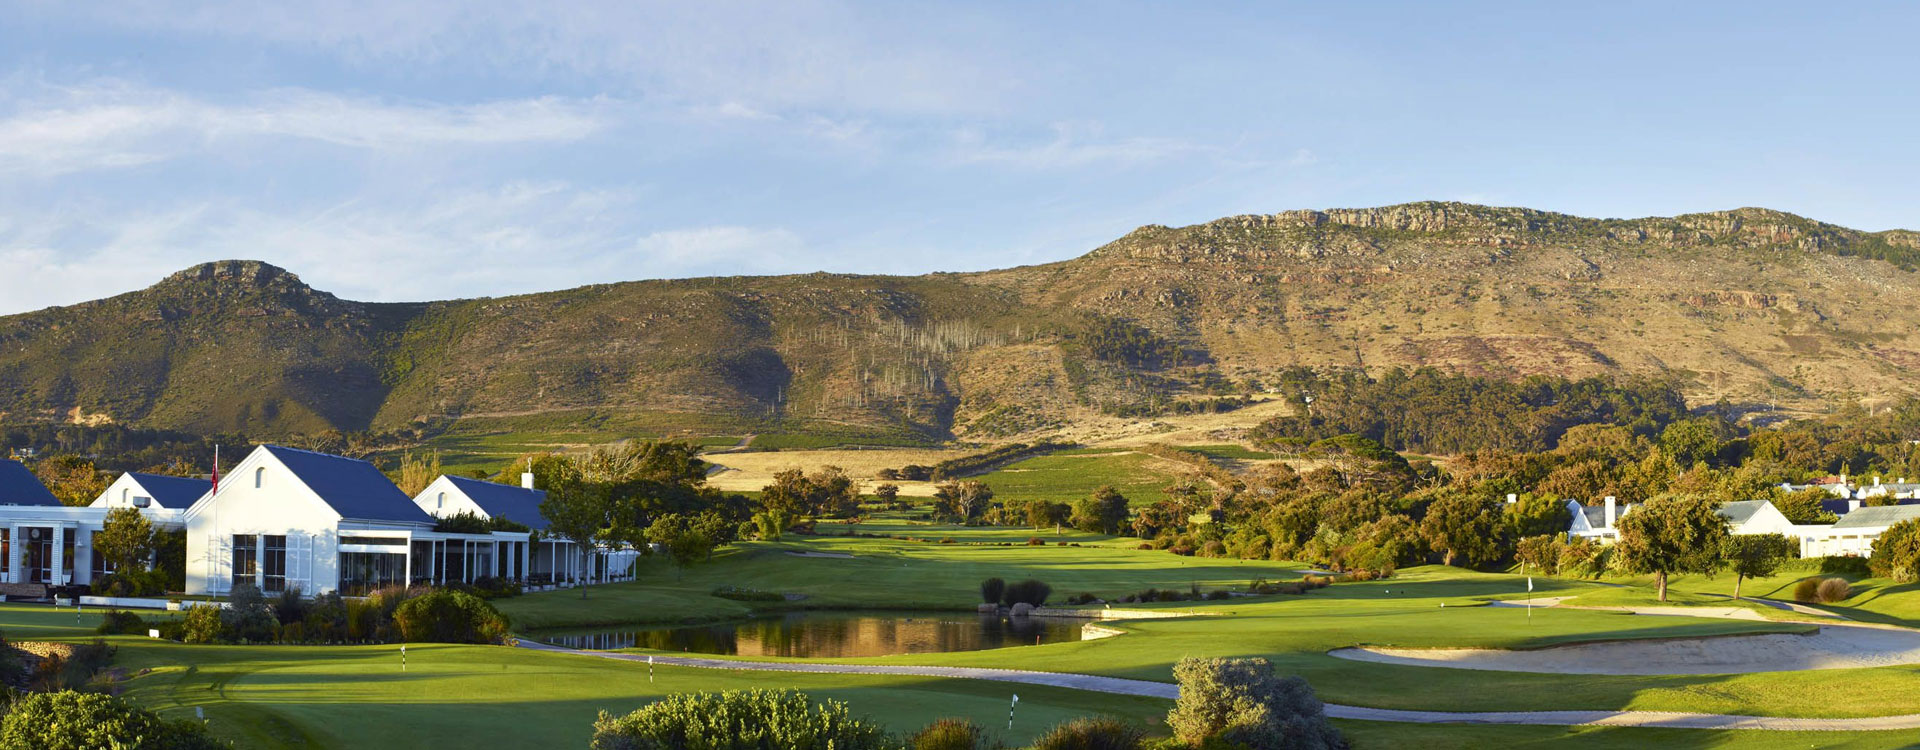 7 Day Golf and Sightseeing in Cape Town